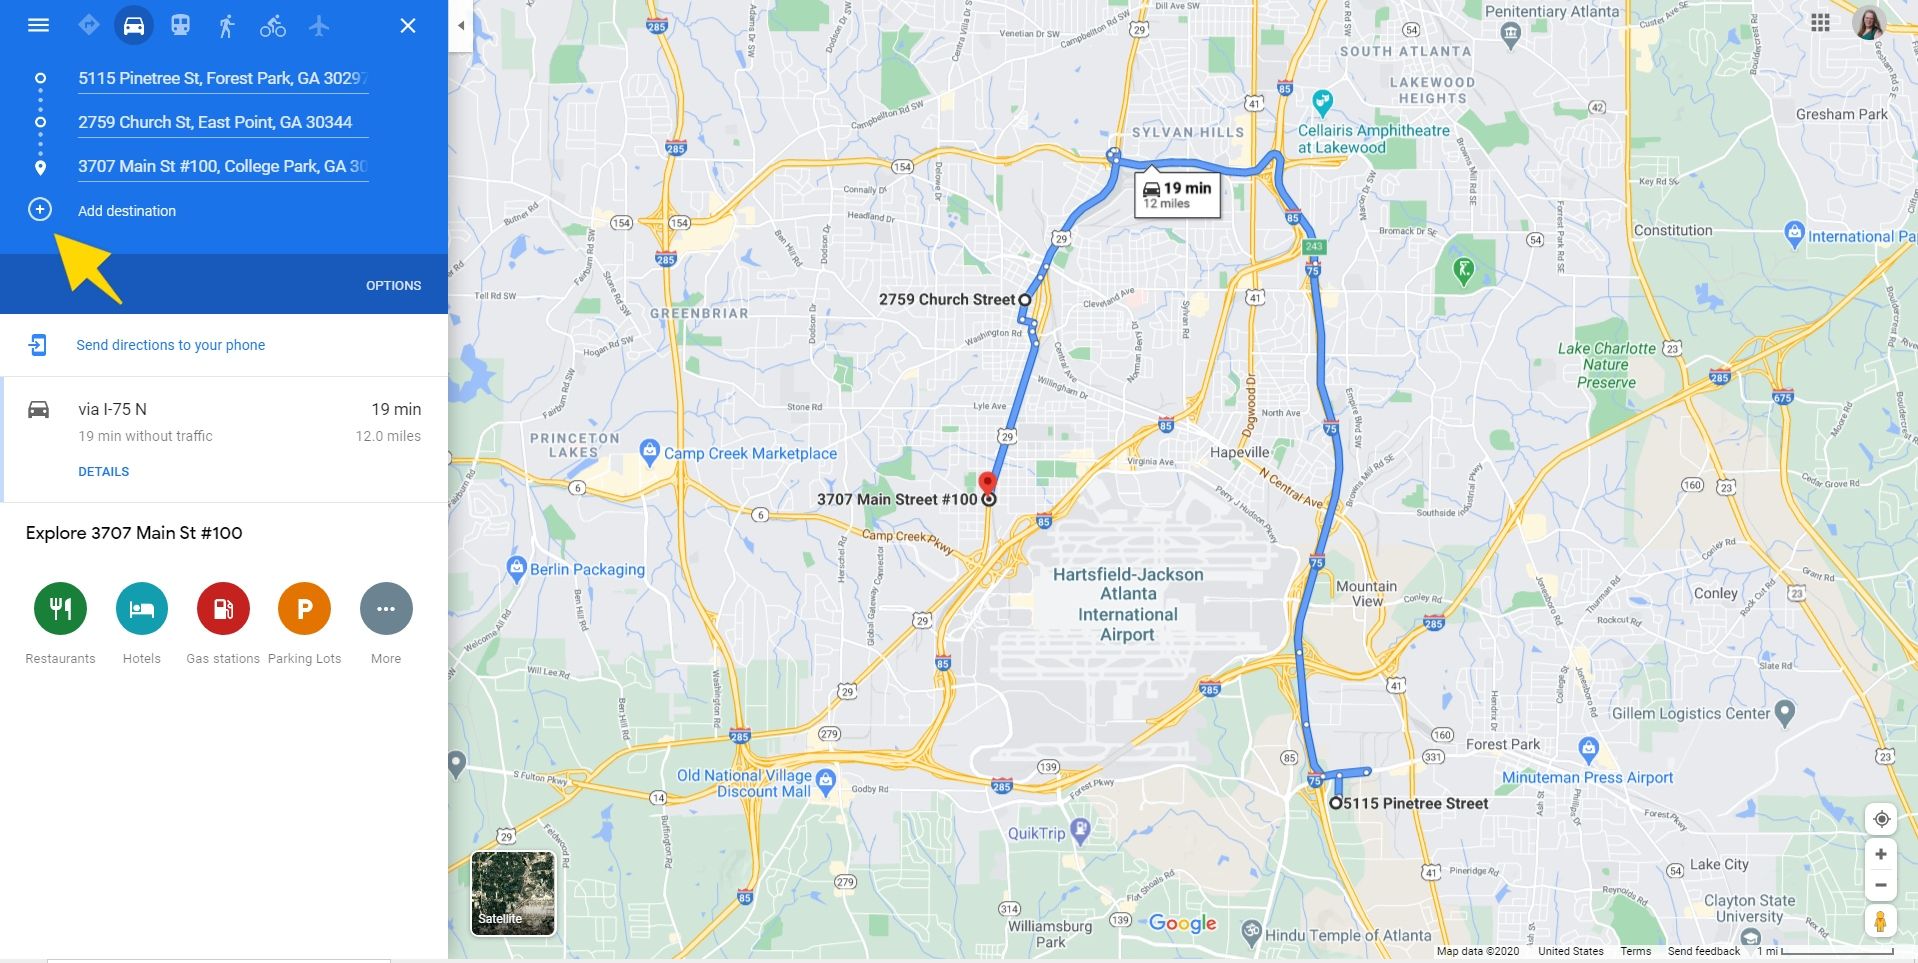 An image of a Google Map for the Atlanta, GA region showing in blue a travel route along roadways that connect addresses listed in the directions panel. An arrow points to the + icon that users must click to add another address to the route